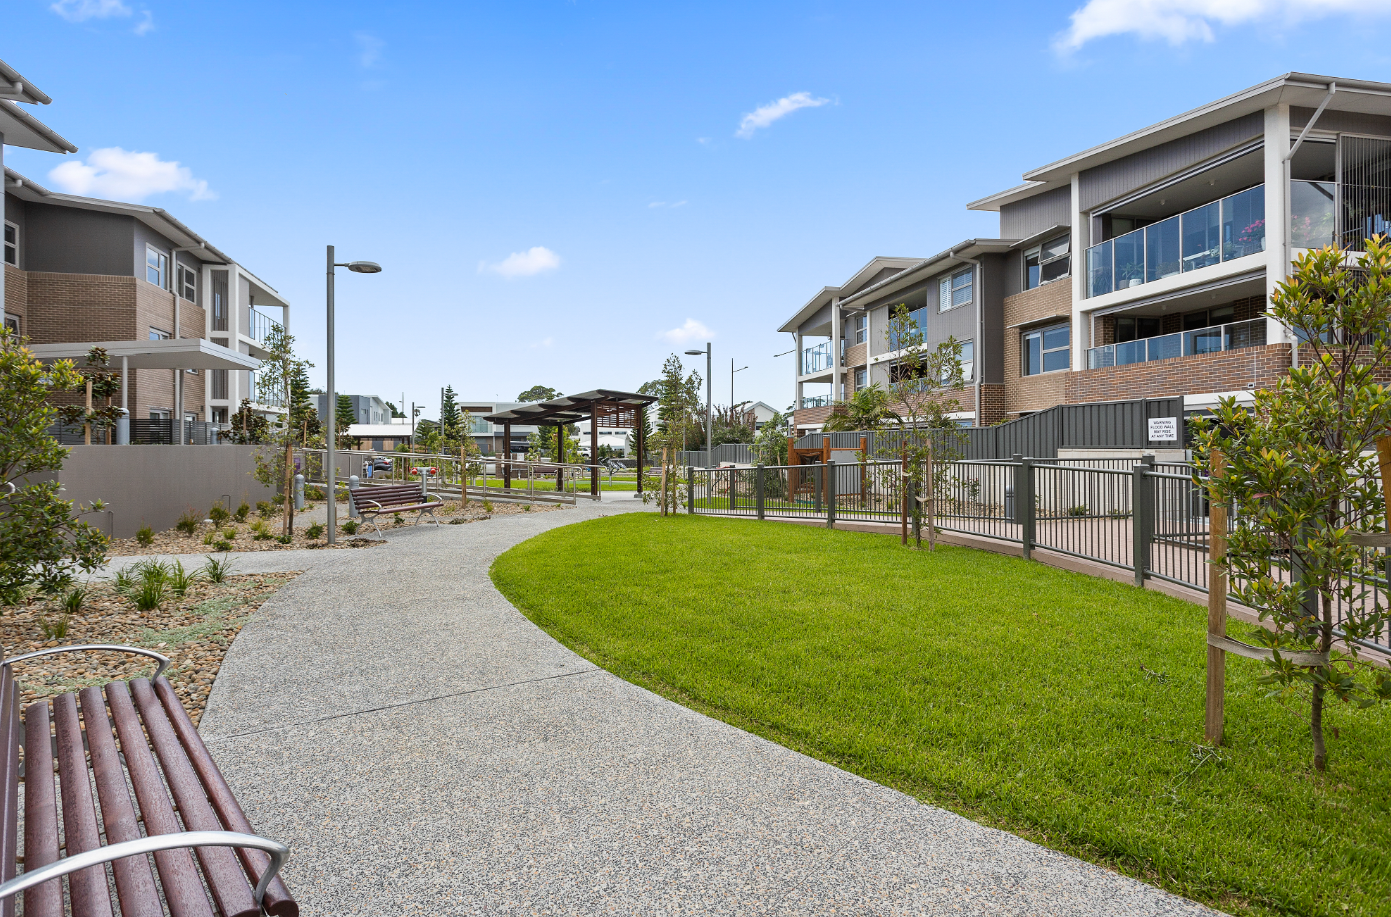 Common Courtyard at Warrigal Shell Cove